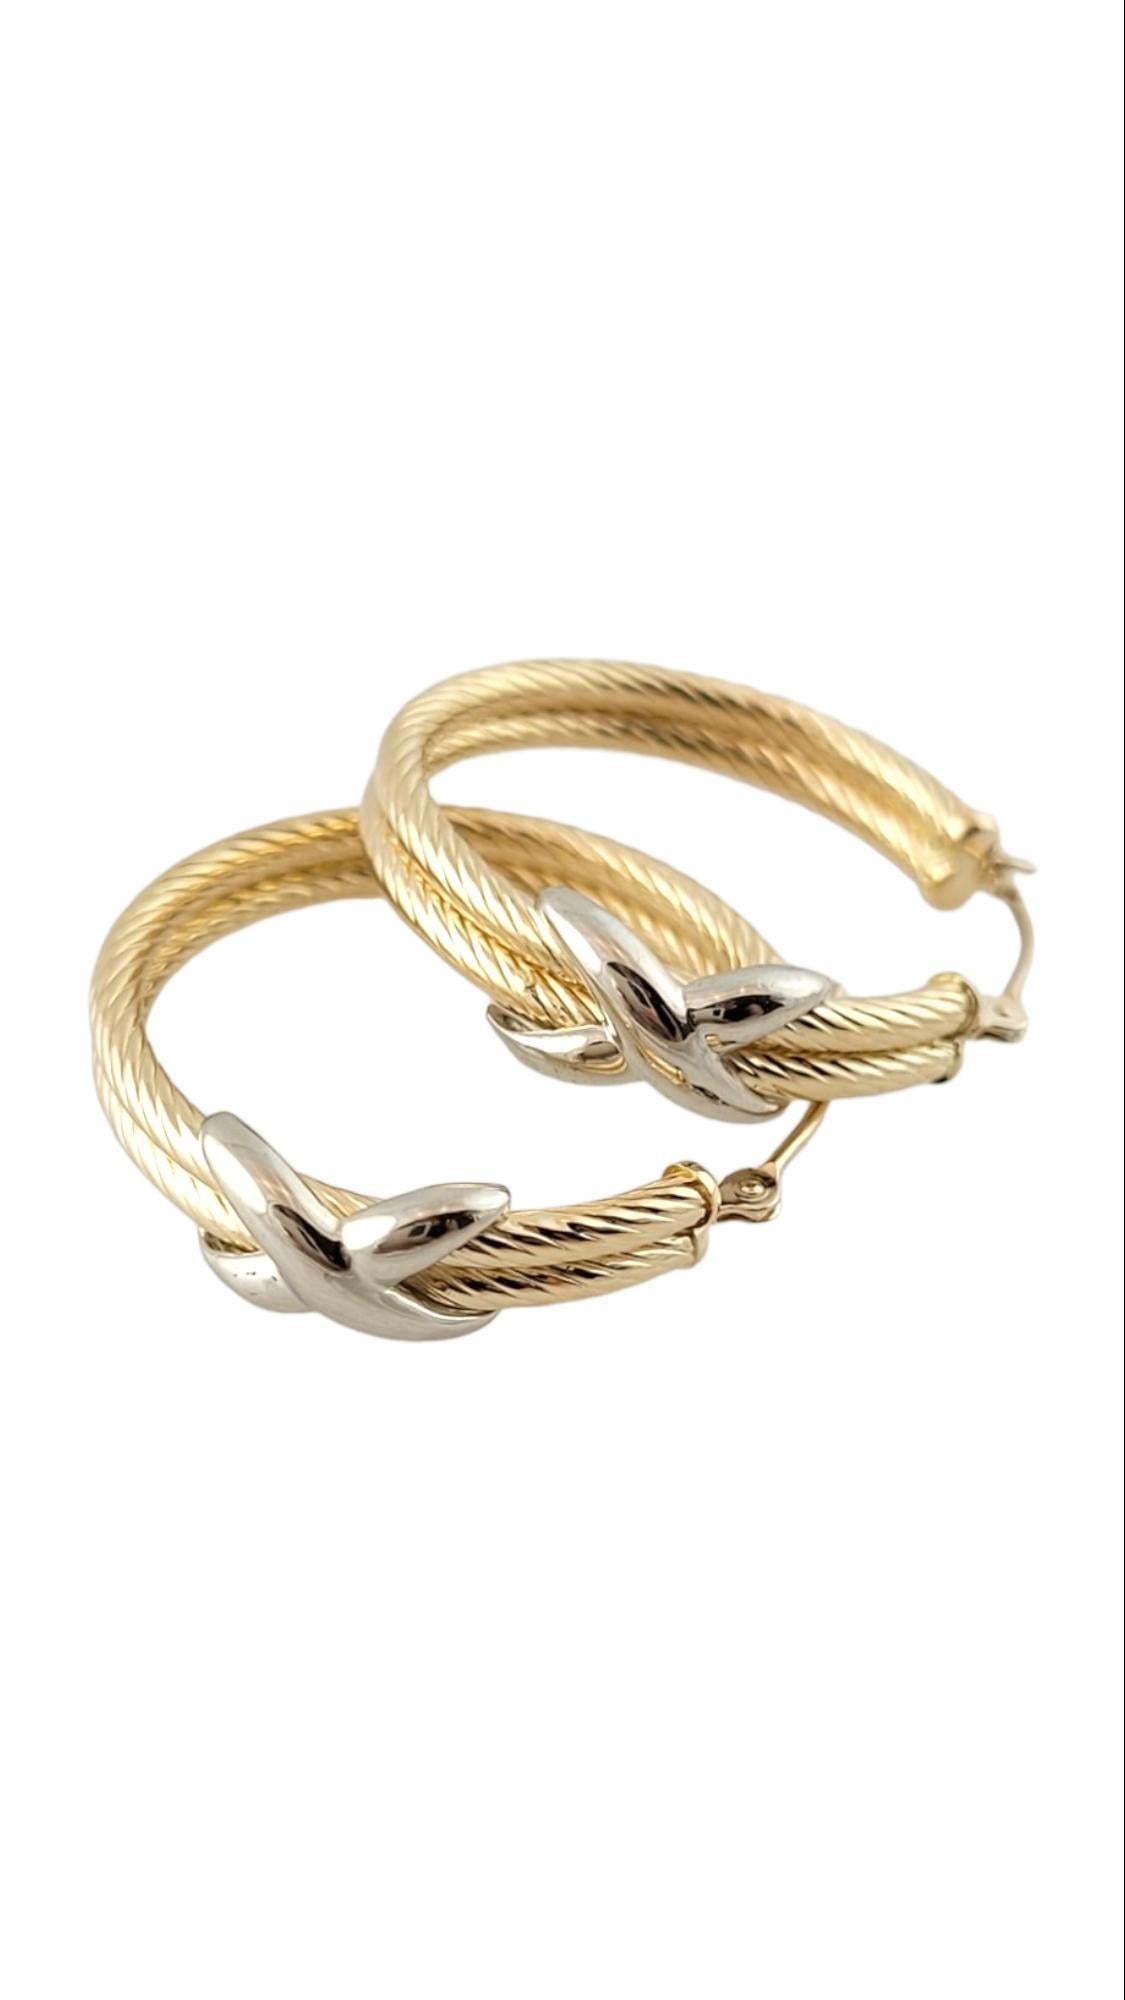 14K Yellow and White Gold Two Tone Twist Double Hoop Earrings

This gorgeous set of 14K yellow gold double twist hoop earrings feature a beautiful 14K white gold X in the front!

Size: 25.0mm X 25.6mm X 6.1mm

Weight: 3.07 g / 2.0 dwt

Hallmark: 14K